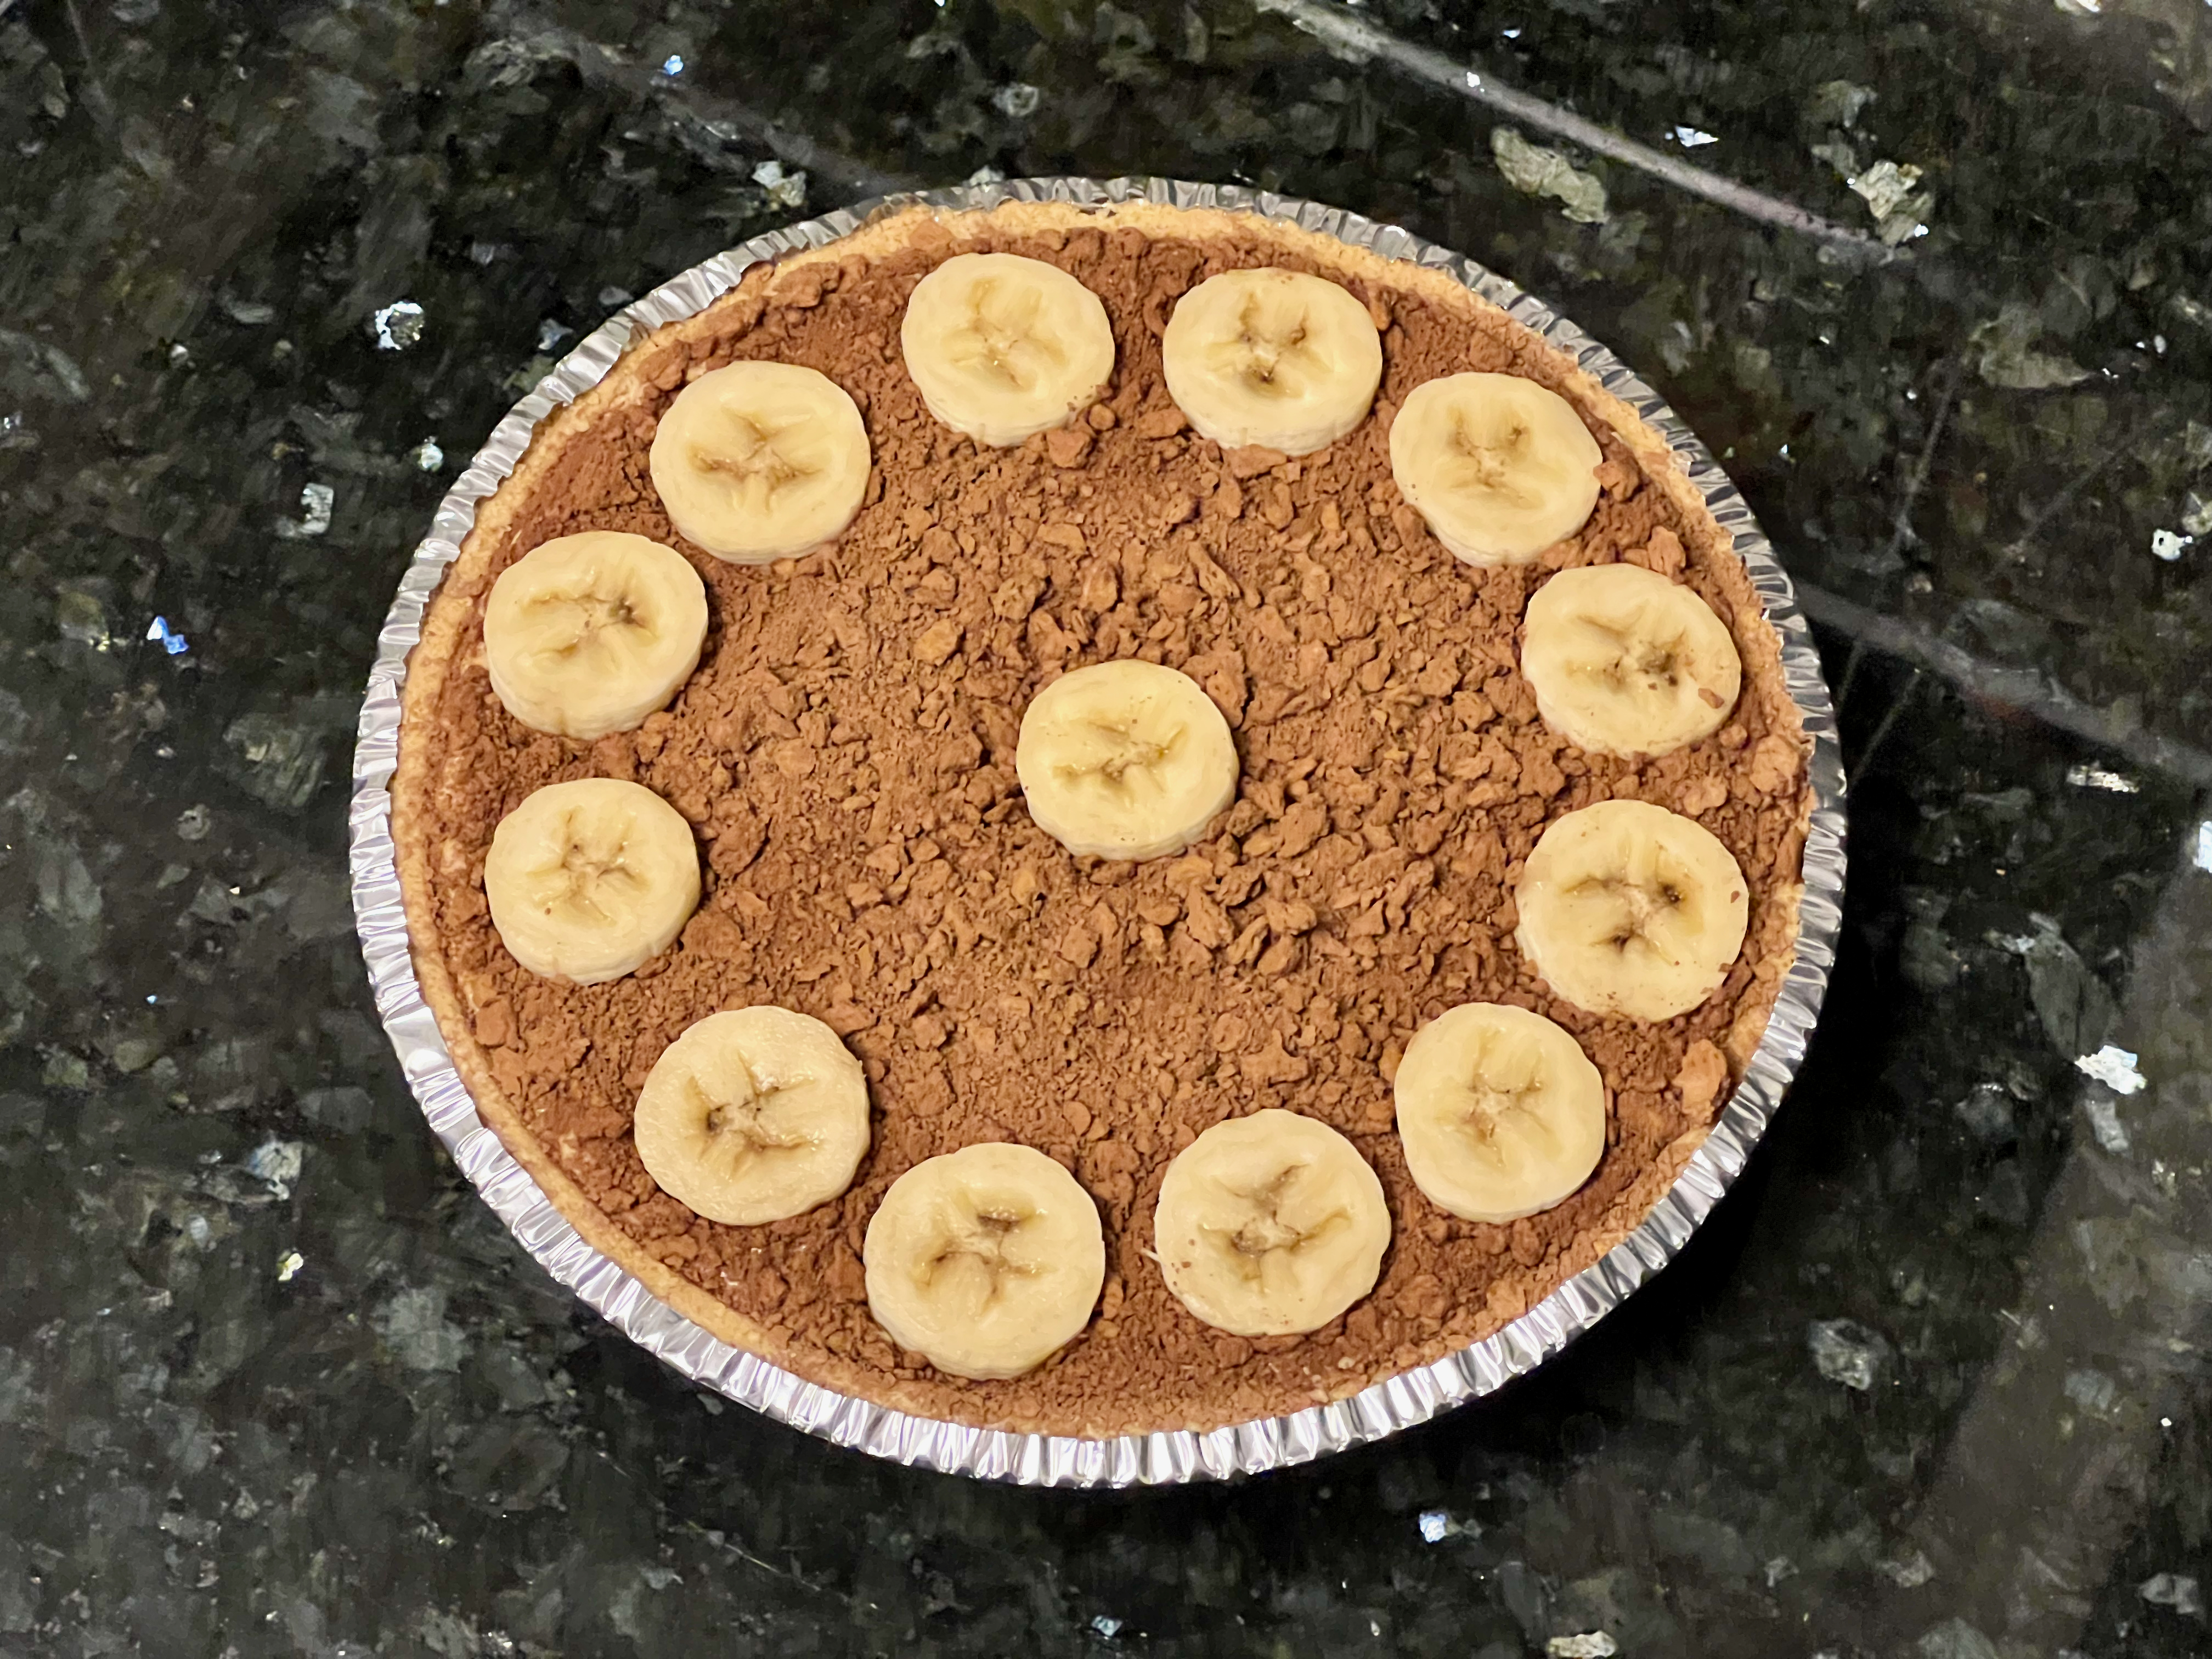 A pie with a graham cracker crust, covered in chocolate crumbs, with a ring of banana slices around the edge.